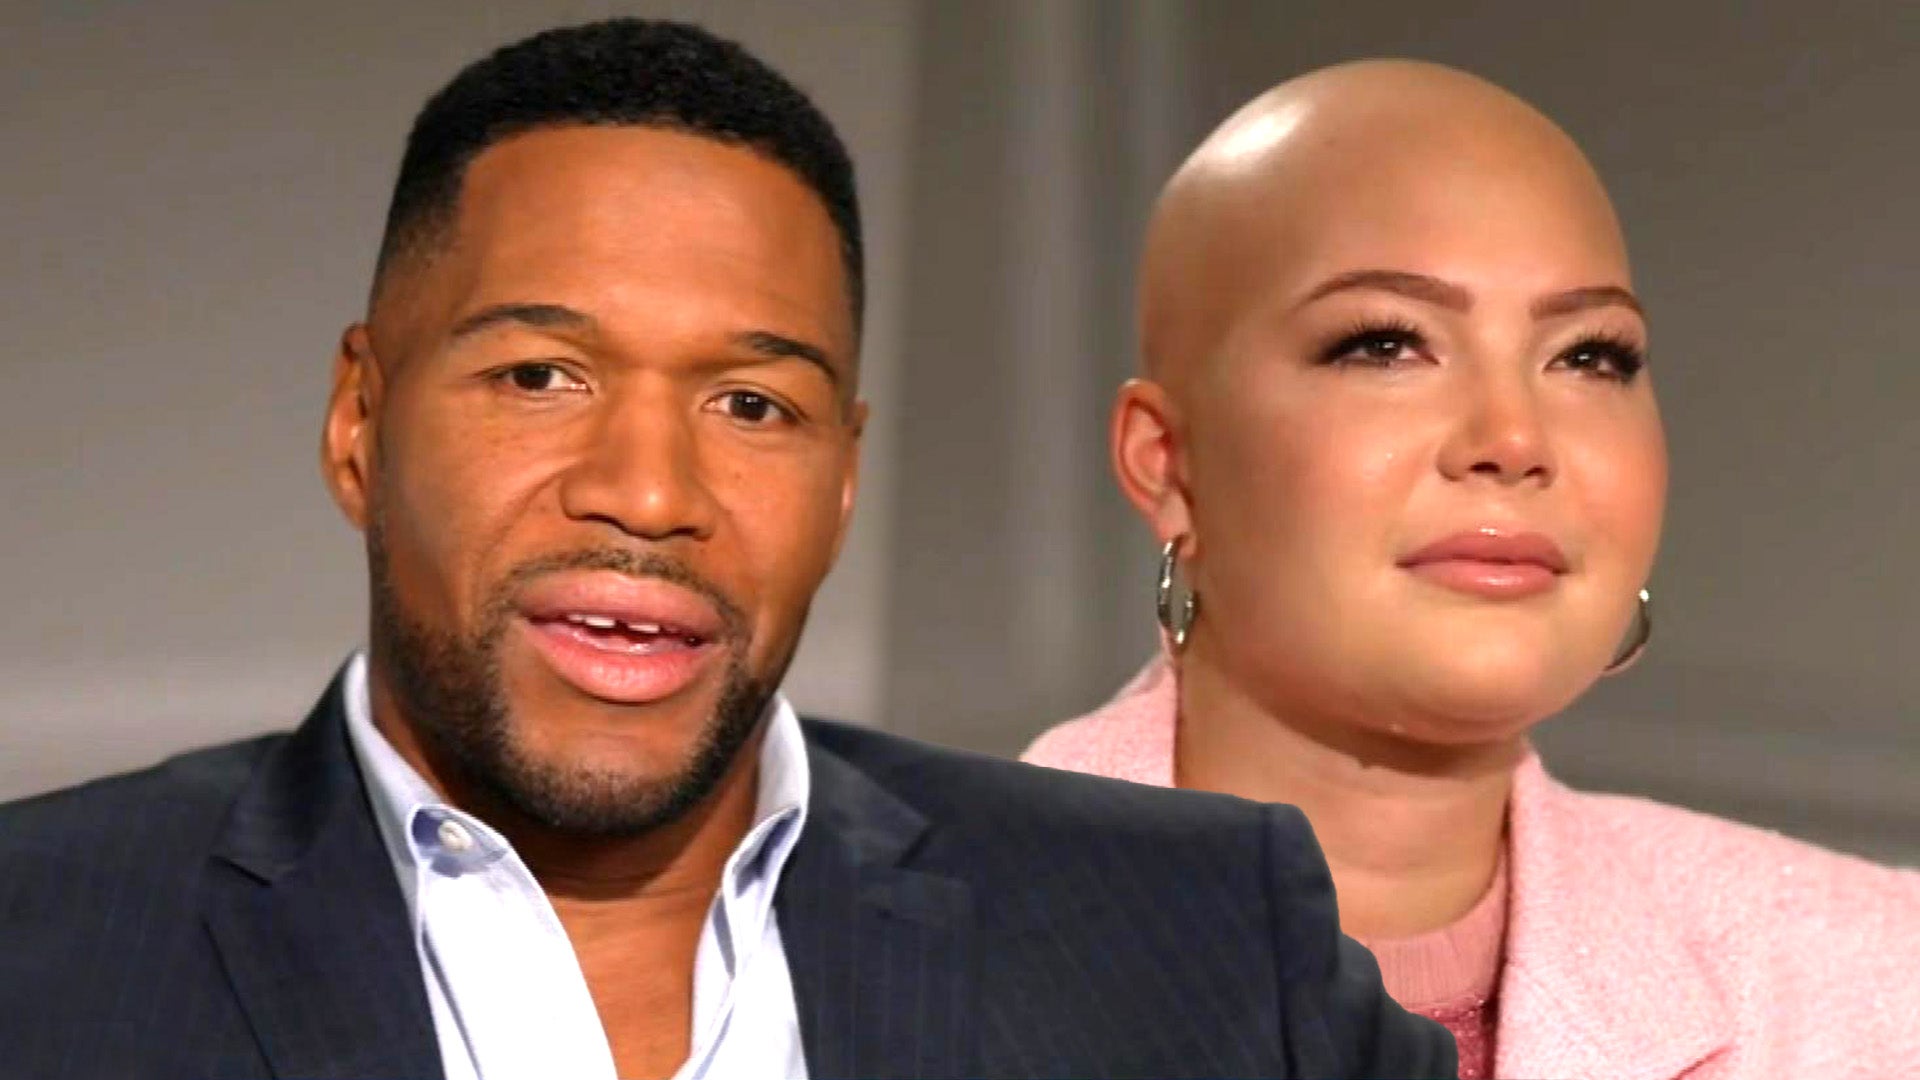 Michael Strahan Tears Up Over 19-Year-Old Daughter's Cancer Reveal